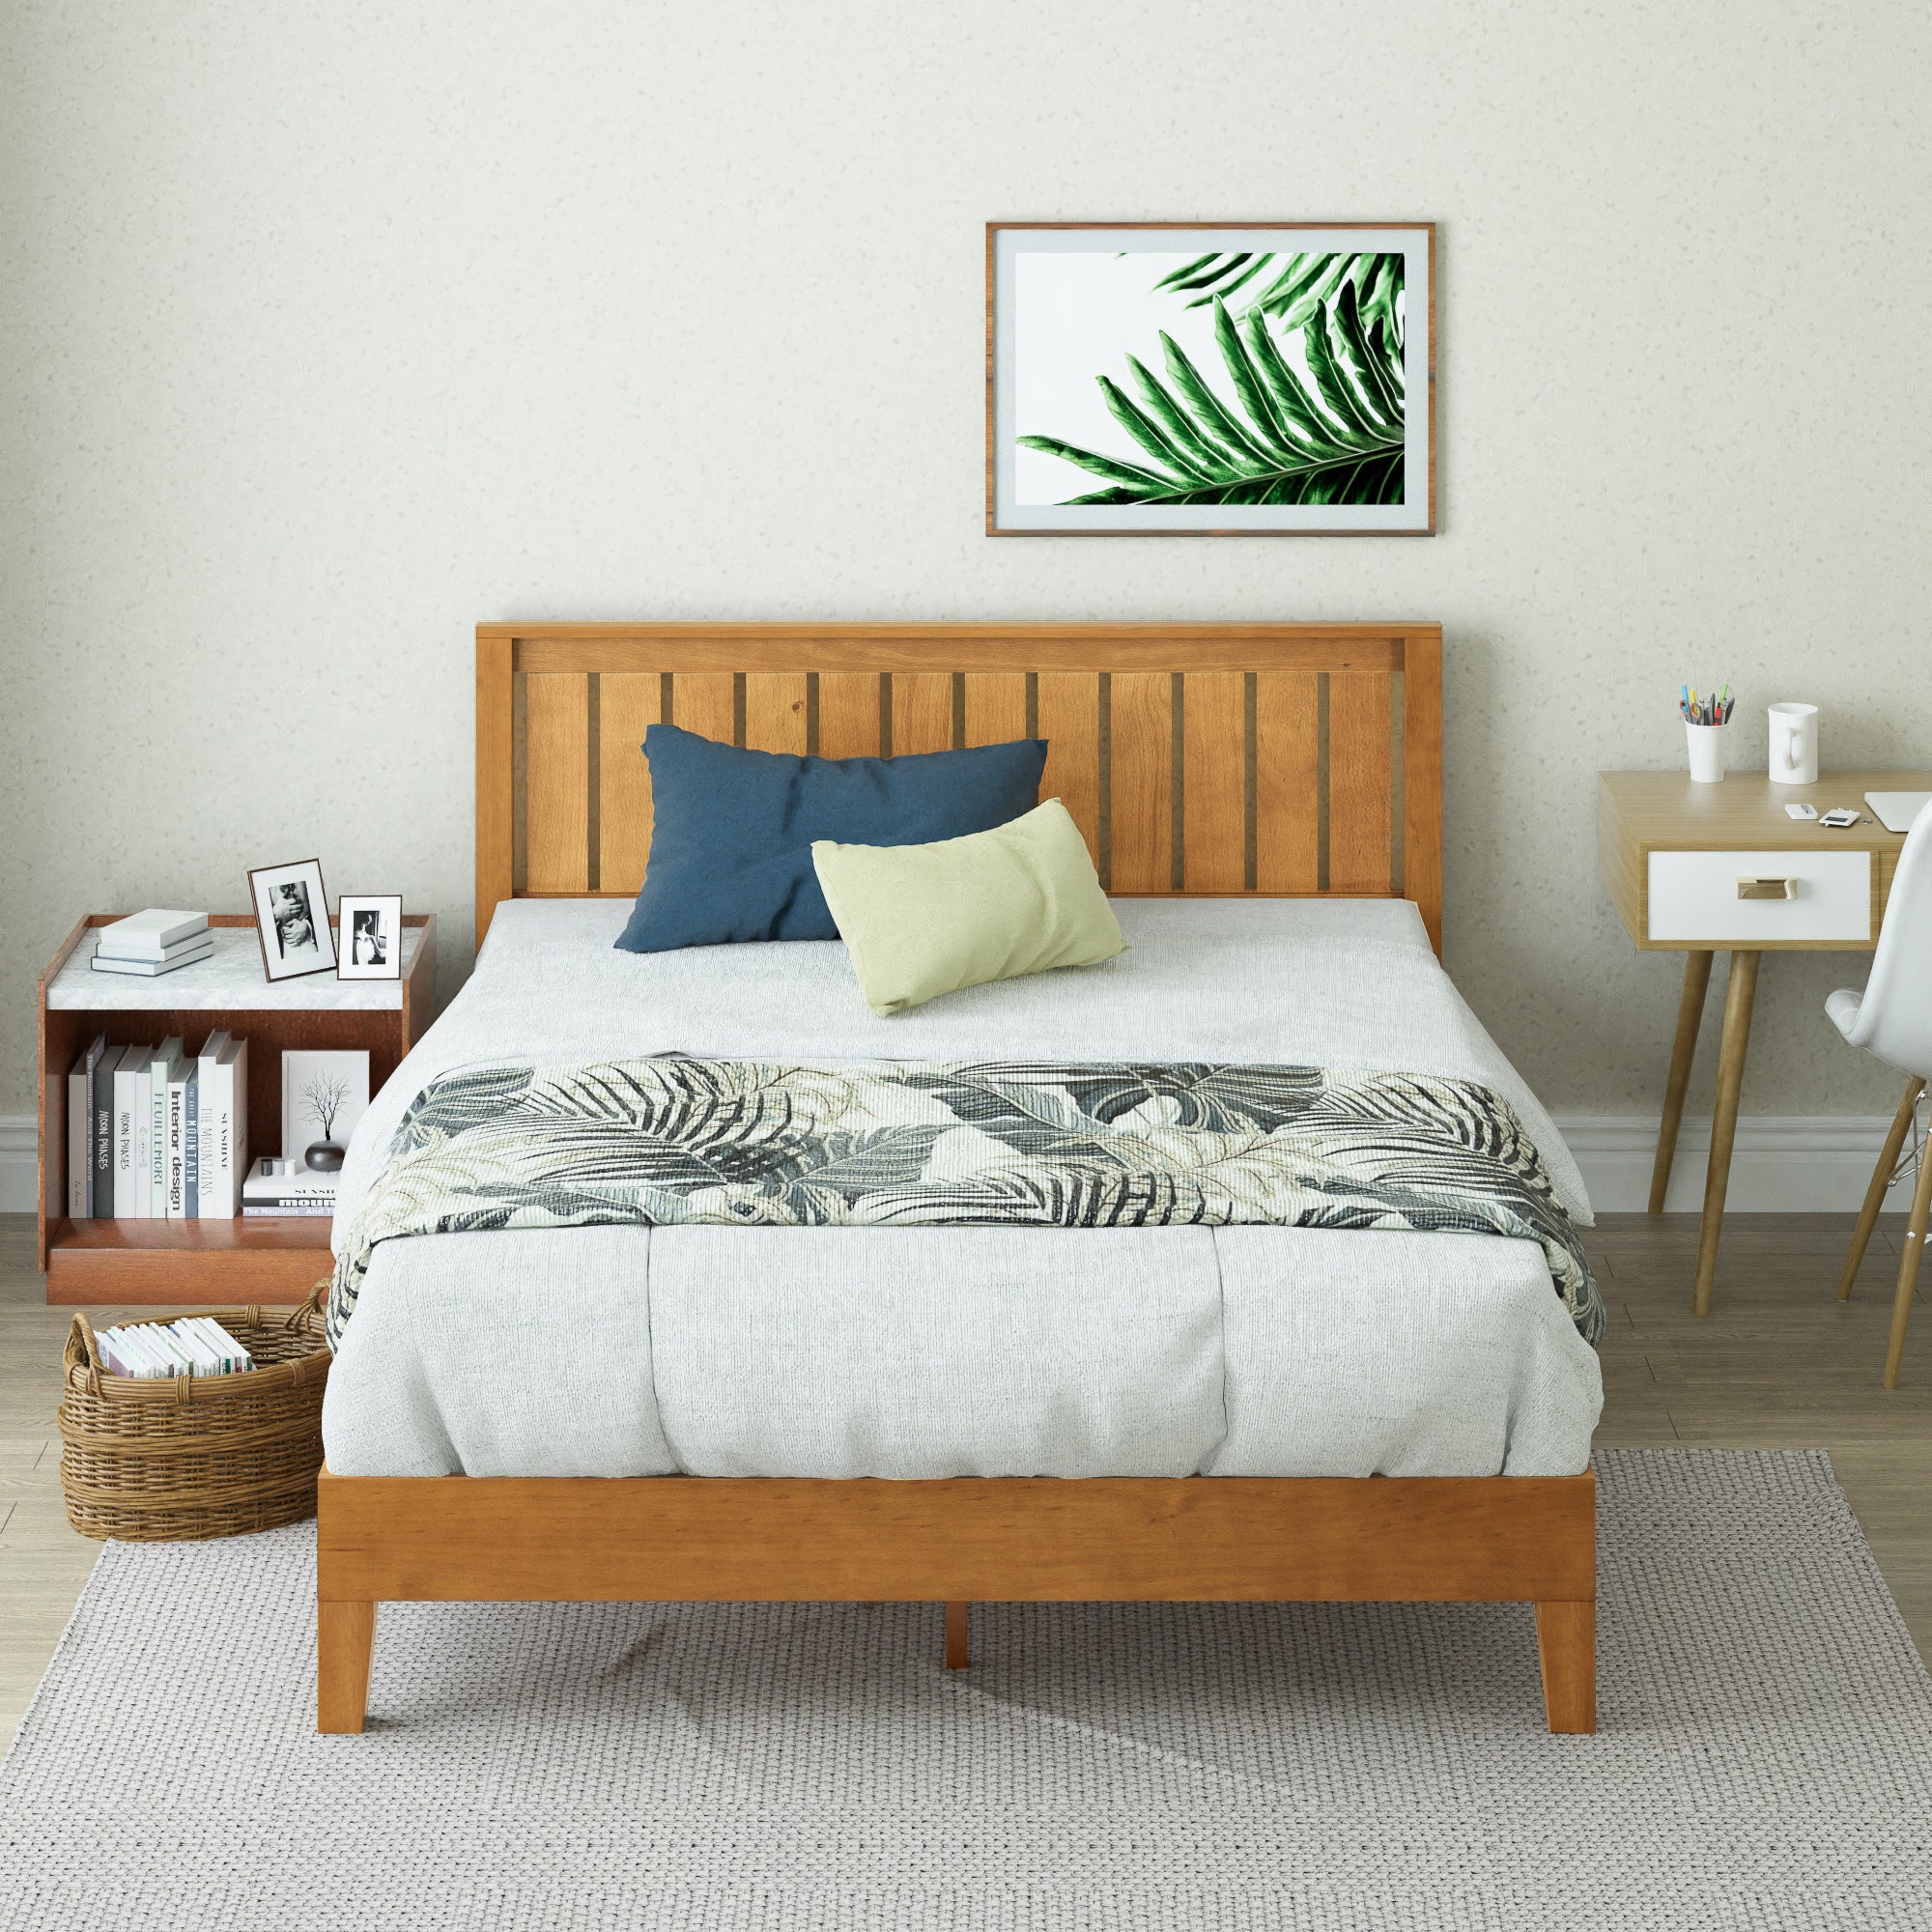 Alexis Deluxe Wood Platform Bed Frame with Headboard